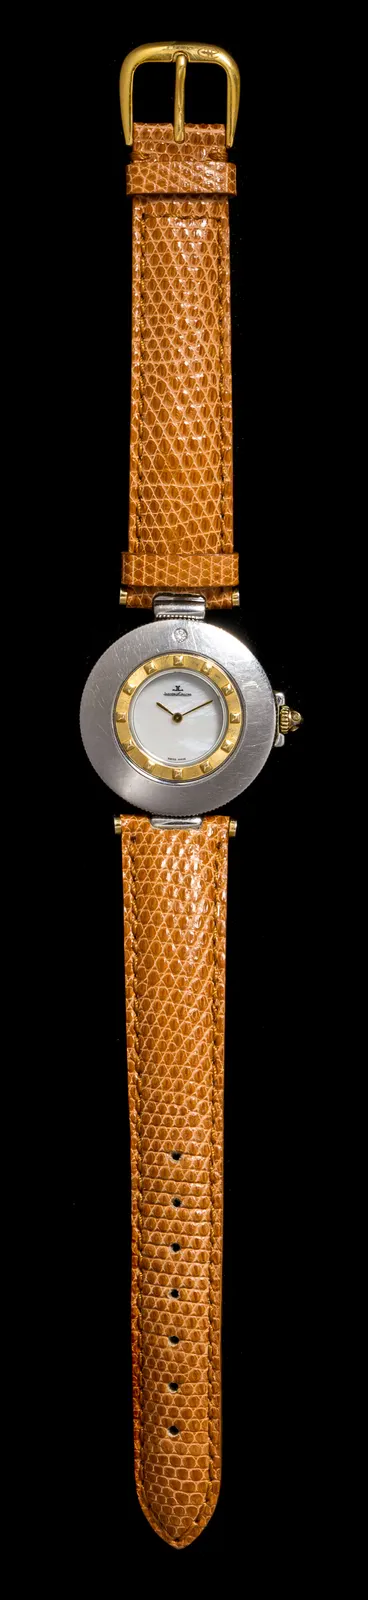 Jaeger-LeCoultre Rendez-Vous 421.5.09 30mm Yellow gold Mother-of-pearl